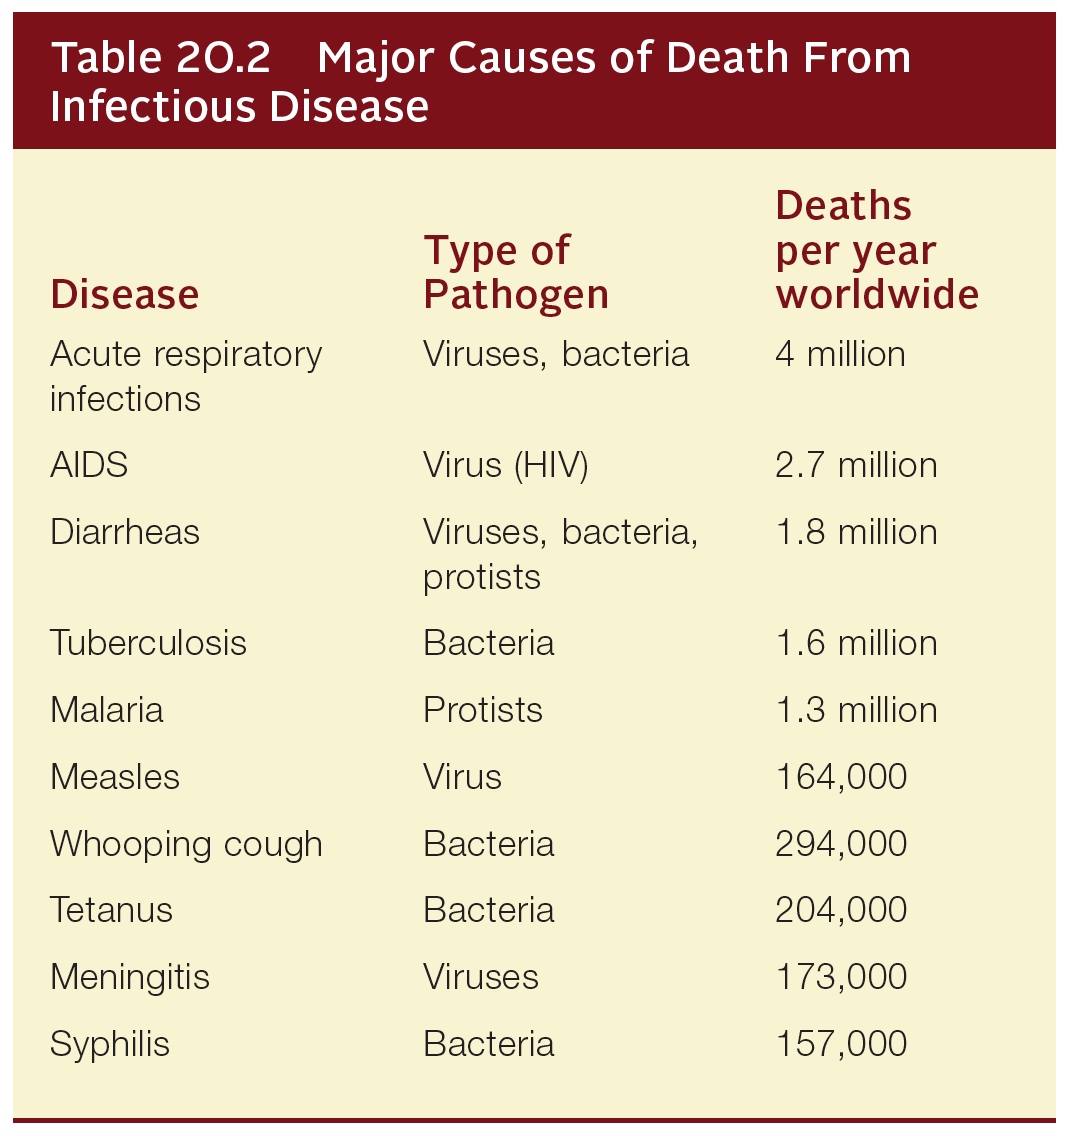 Major Causes of Death from Infectious Disease